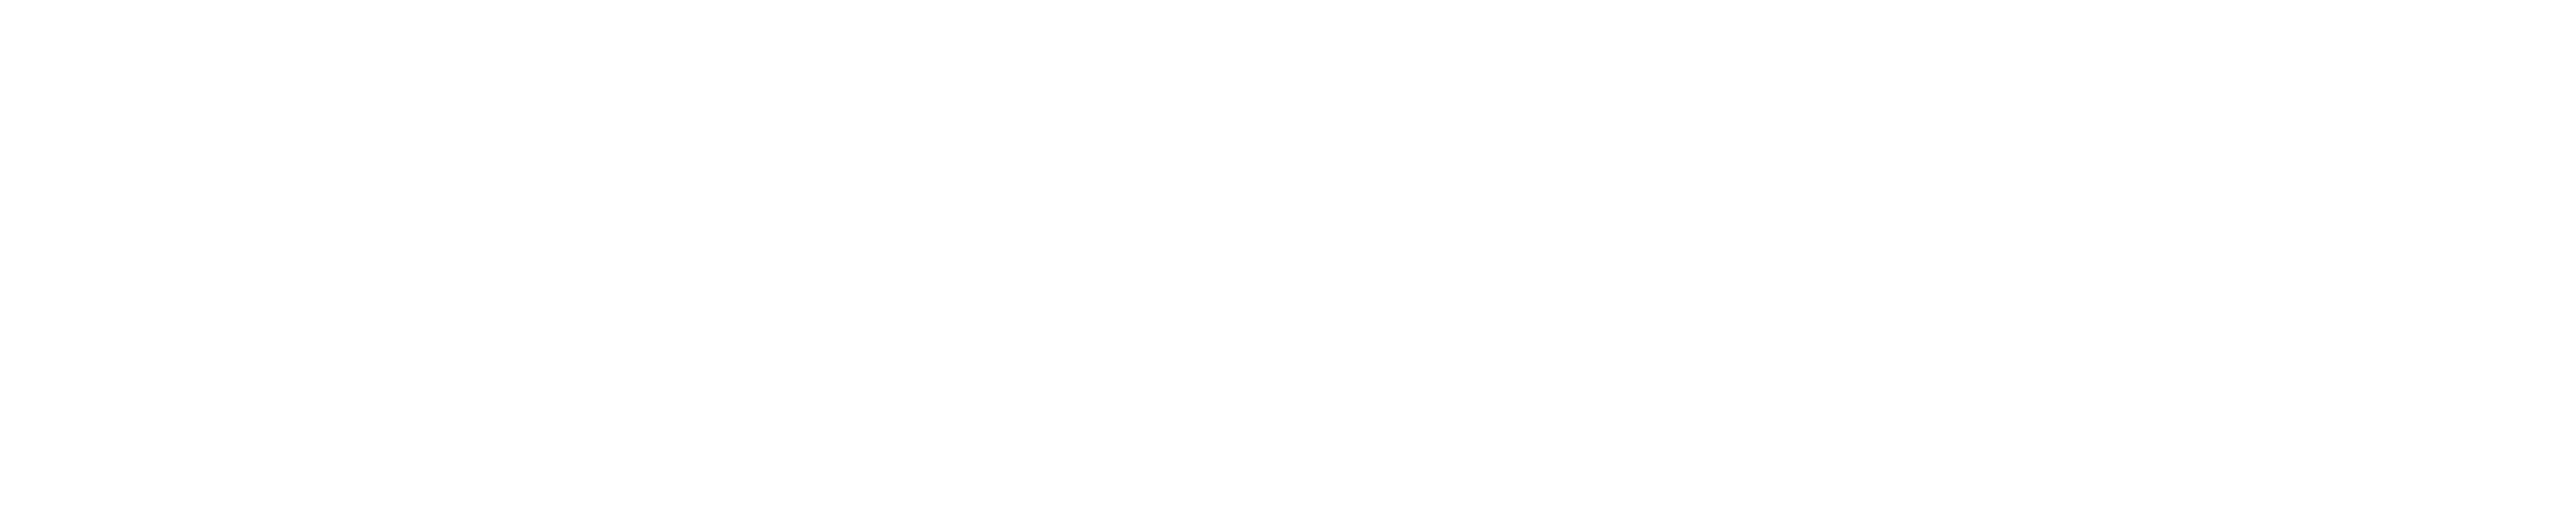 GrowthSmart Consulting logo